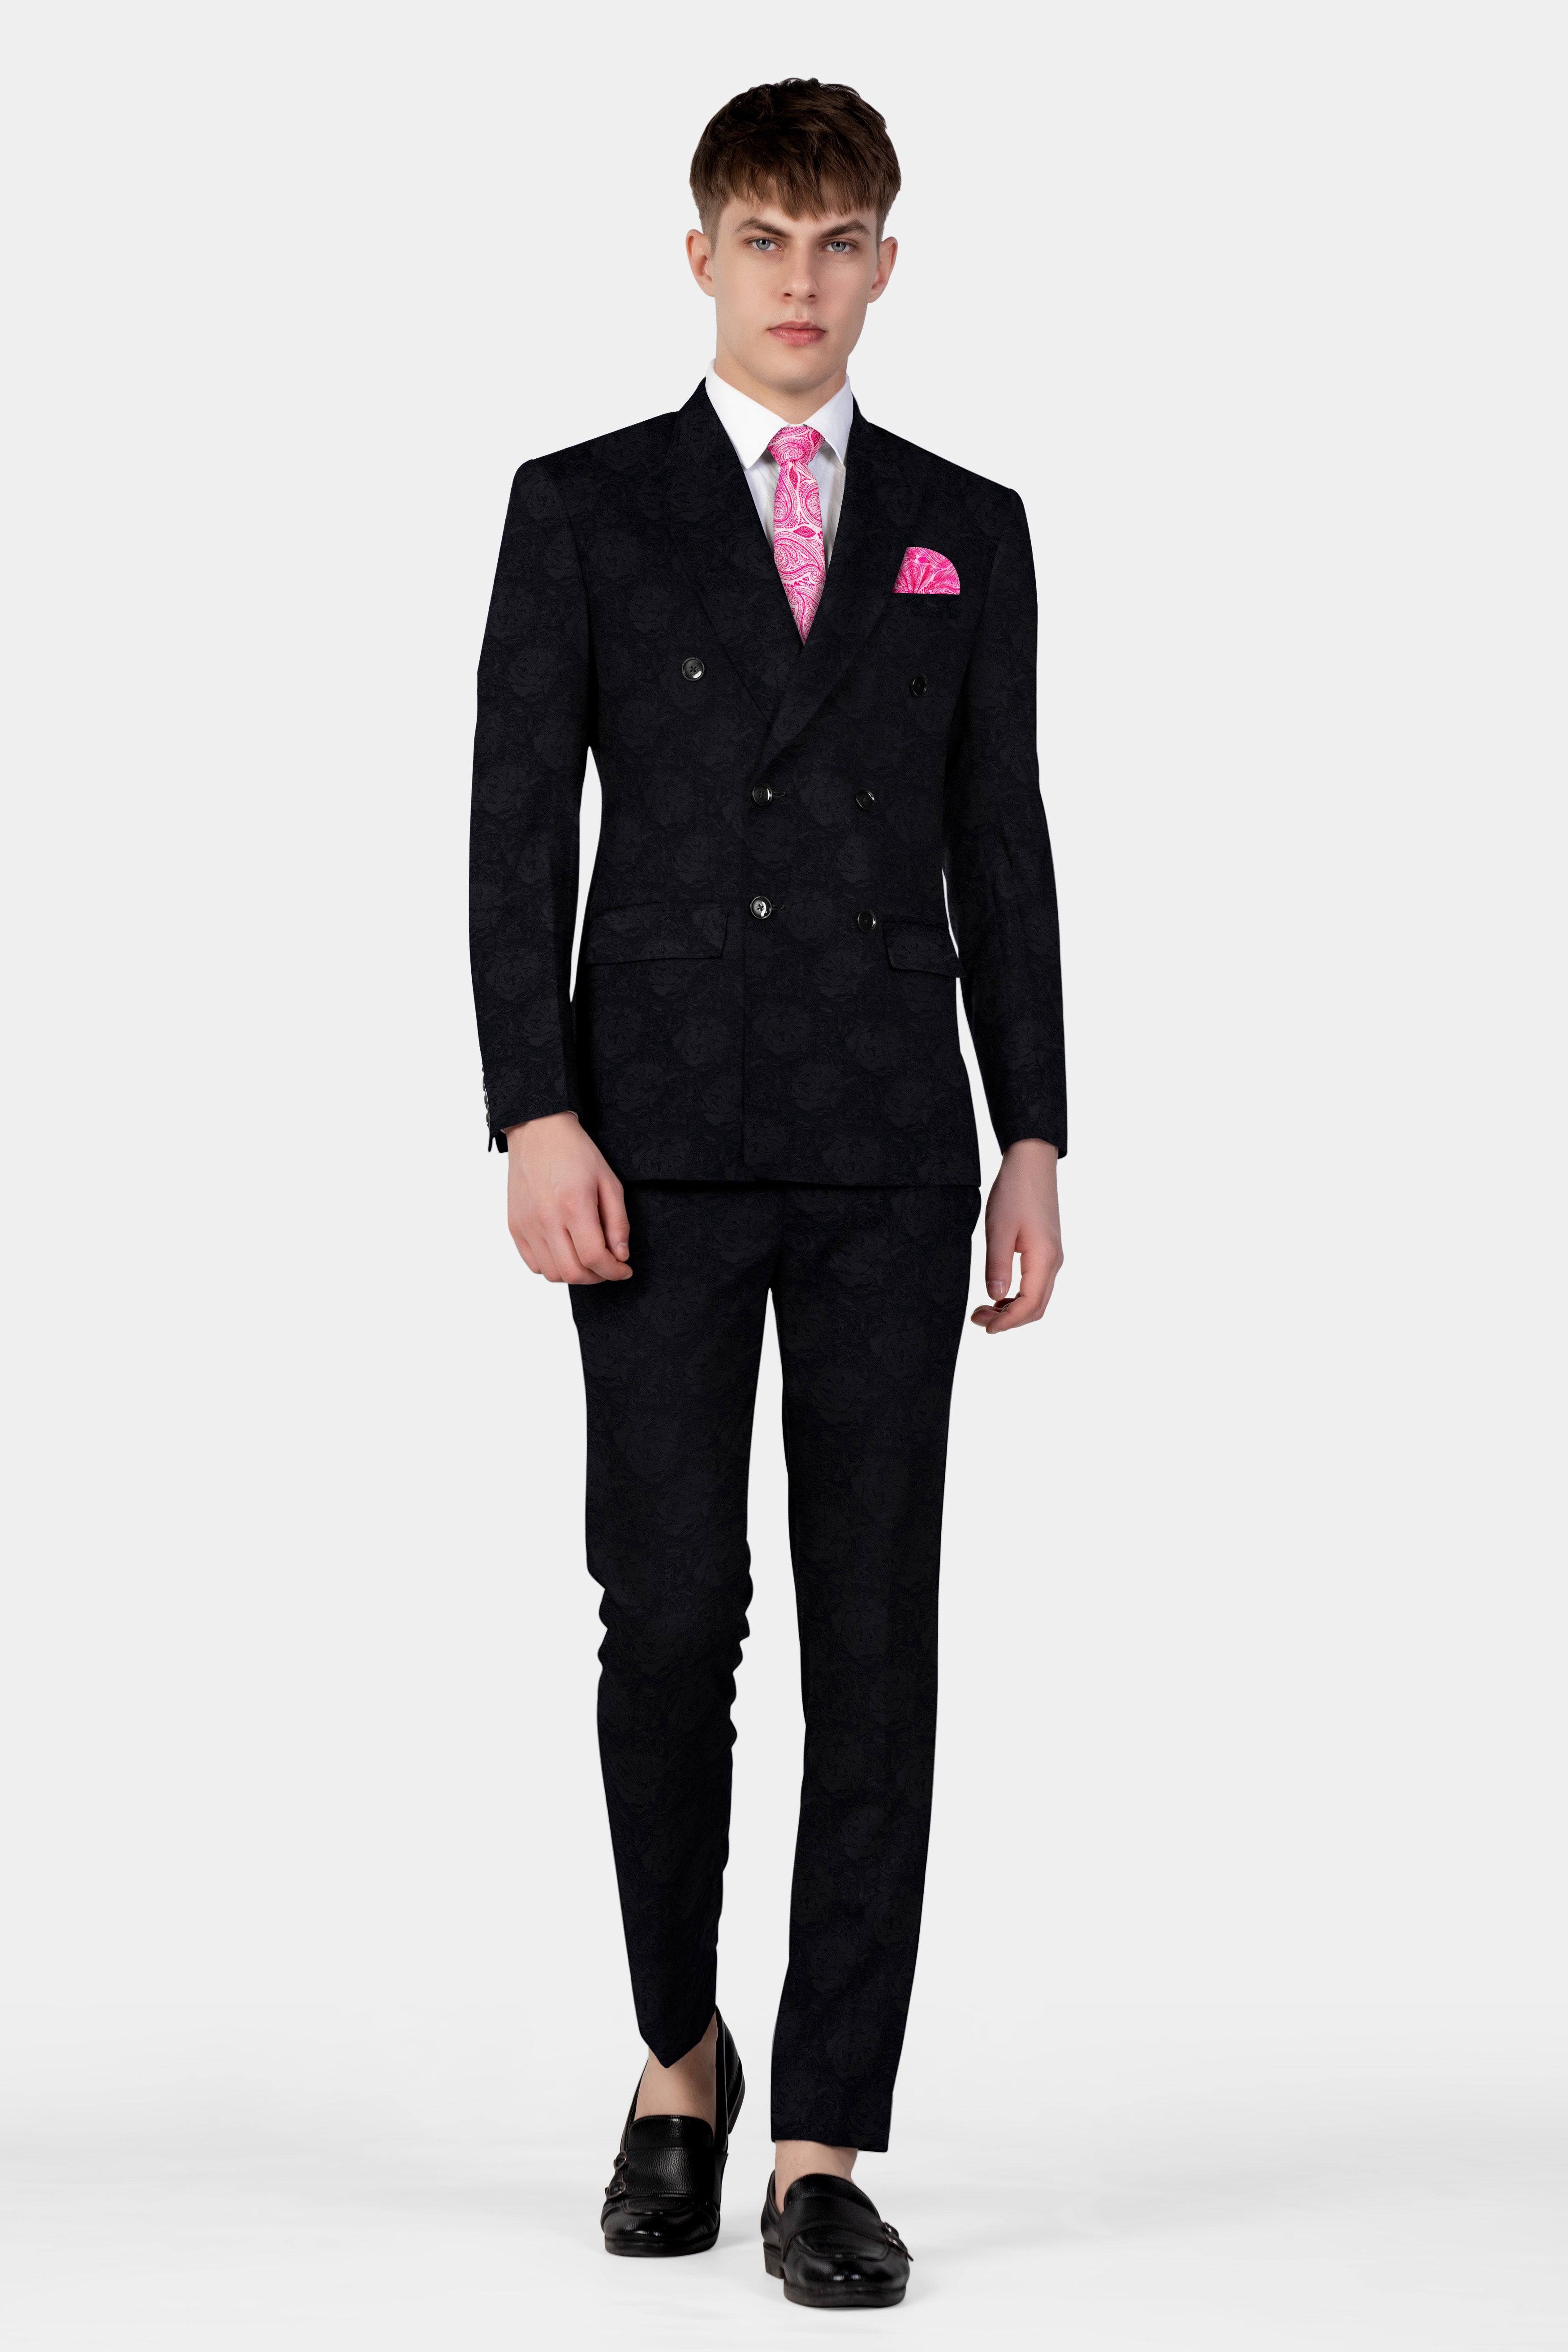 Jade Black Jacquard Textured Double Breasted Suit